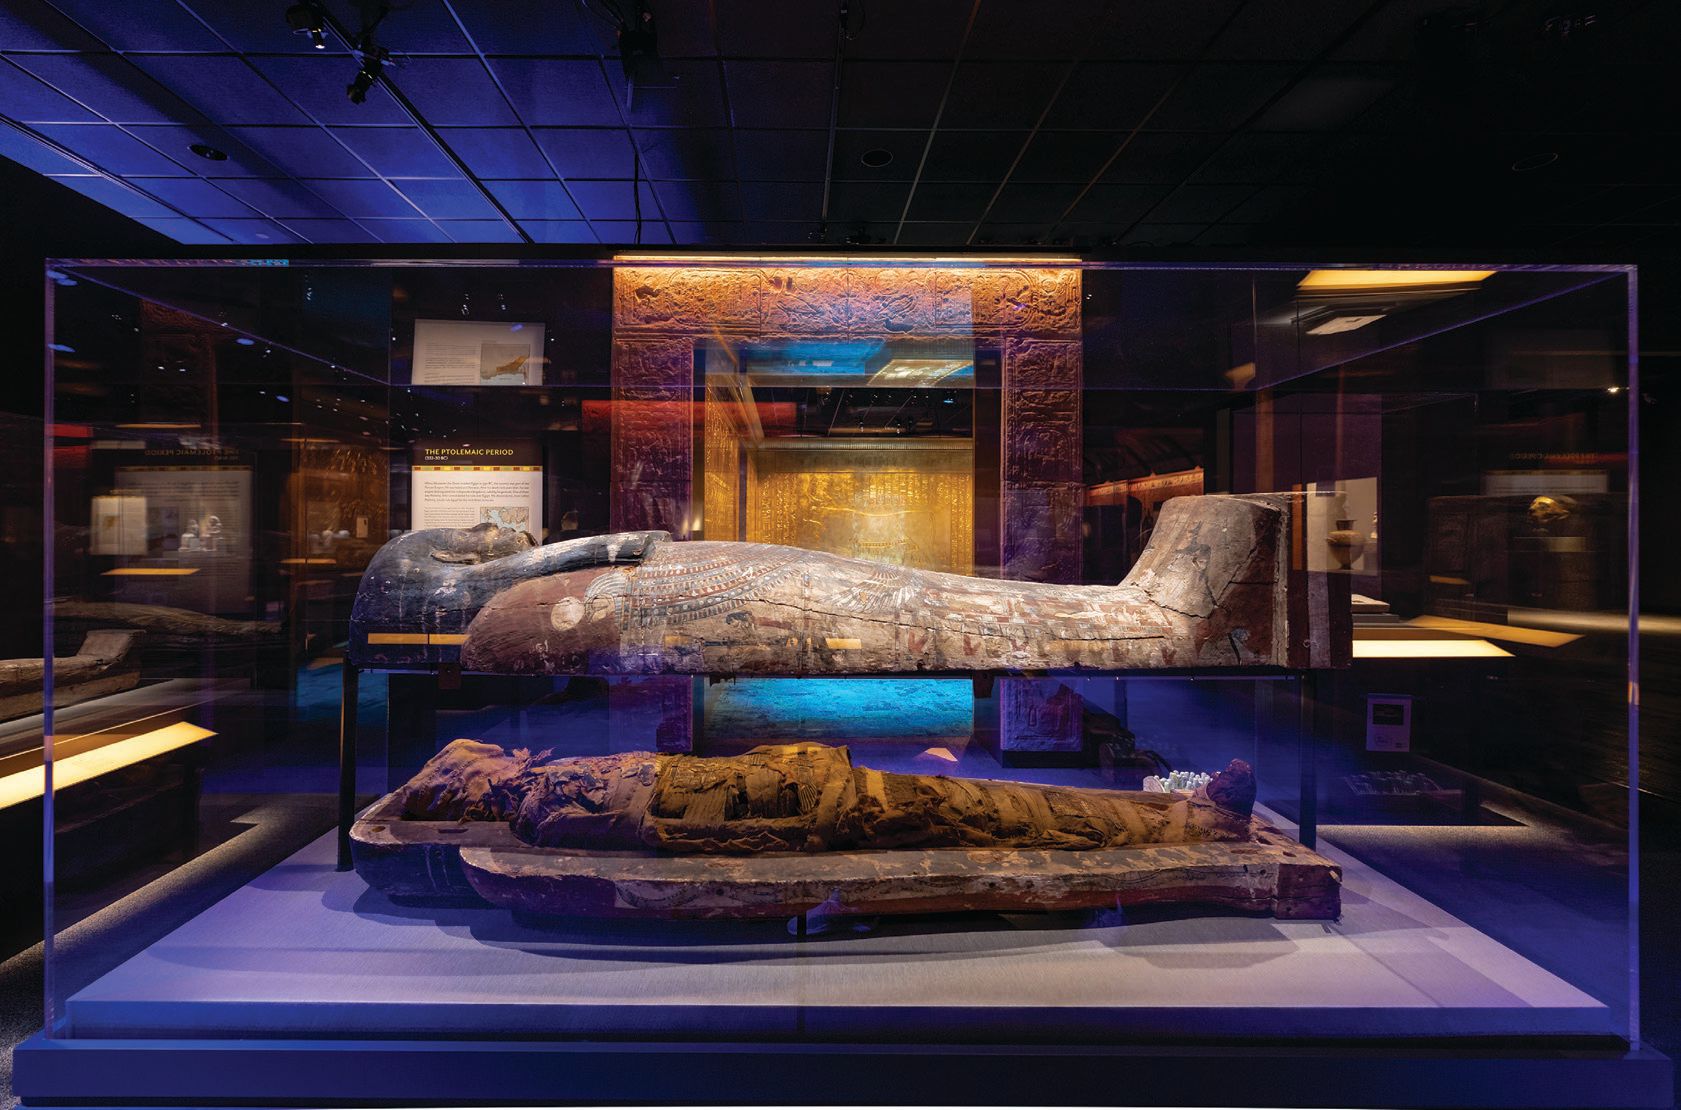 Head to the Houston Museum of Natural Science to see its latest exhibit on ancient Egypt. PHOTO BY MIKE RATHKE/COURTESY OF HOUSTON MUSEUM OF NATURAL SCIENCE